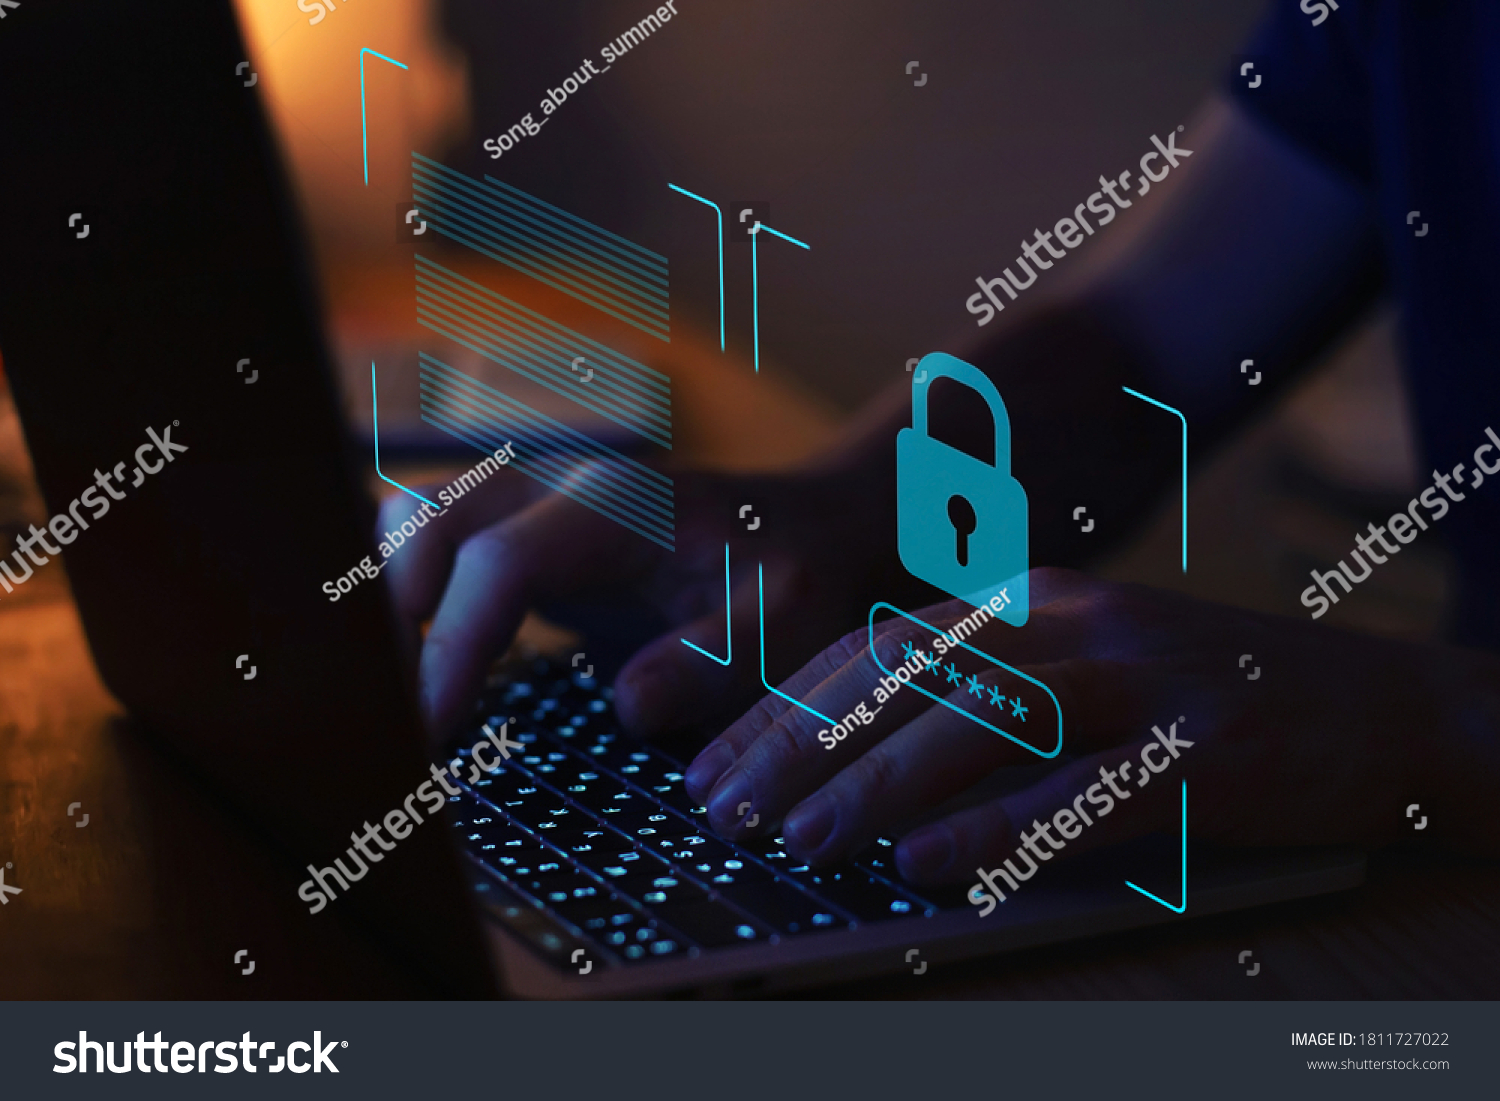 cyber security, digital crime concept, data protection from hacker #1811727022